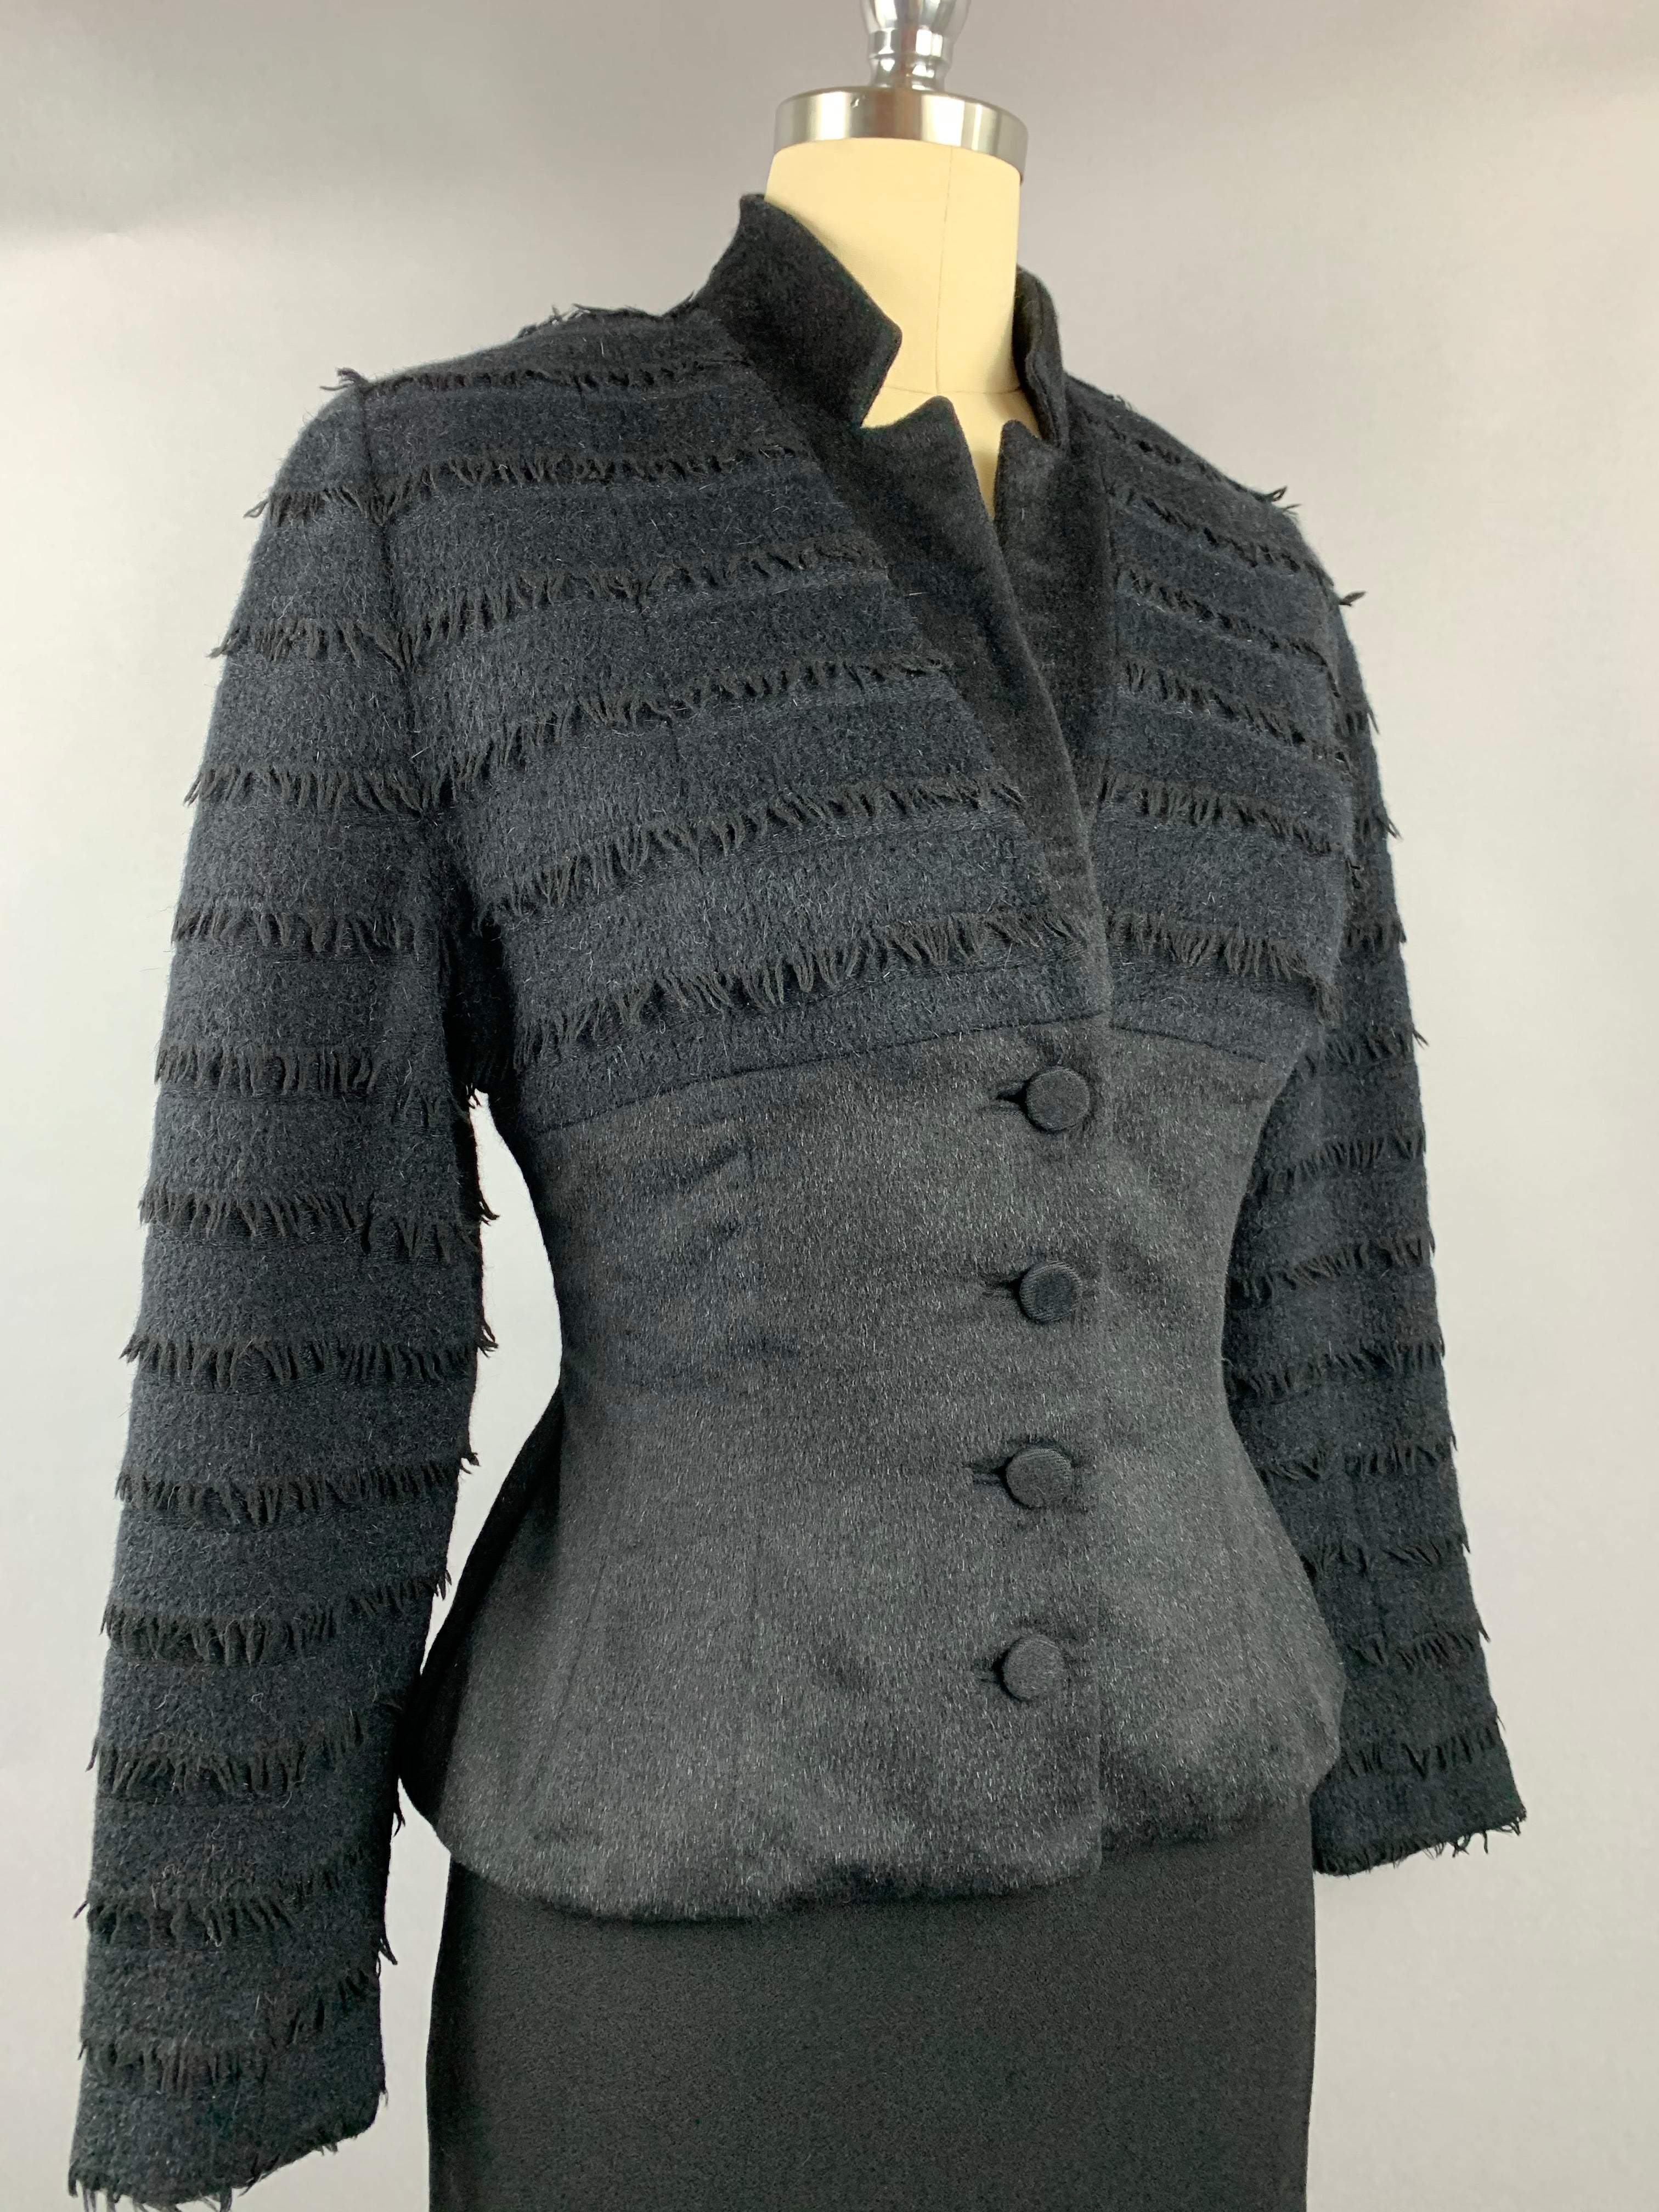 1950s Lilli Ann Fringed Black Wool Mohair Jacket Size S